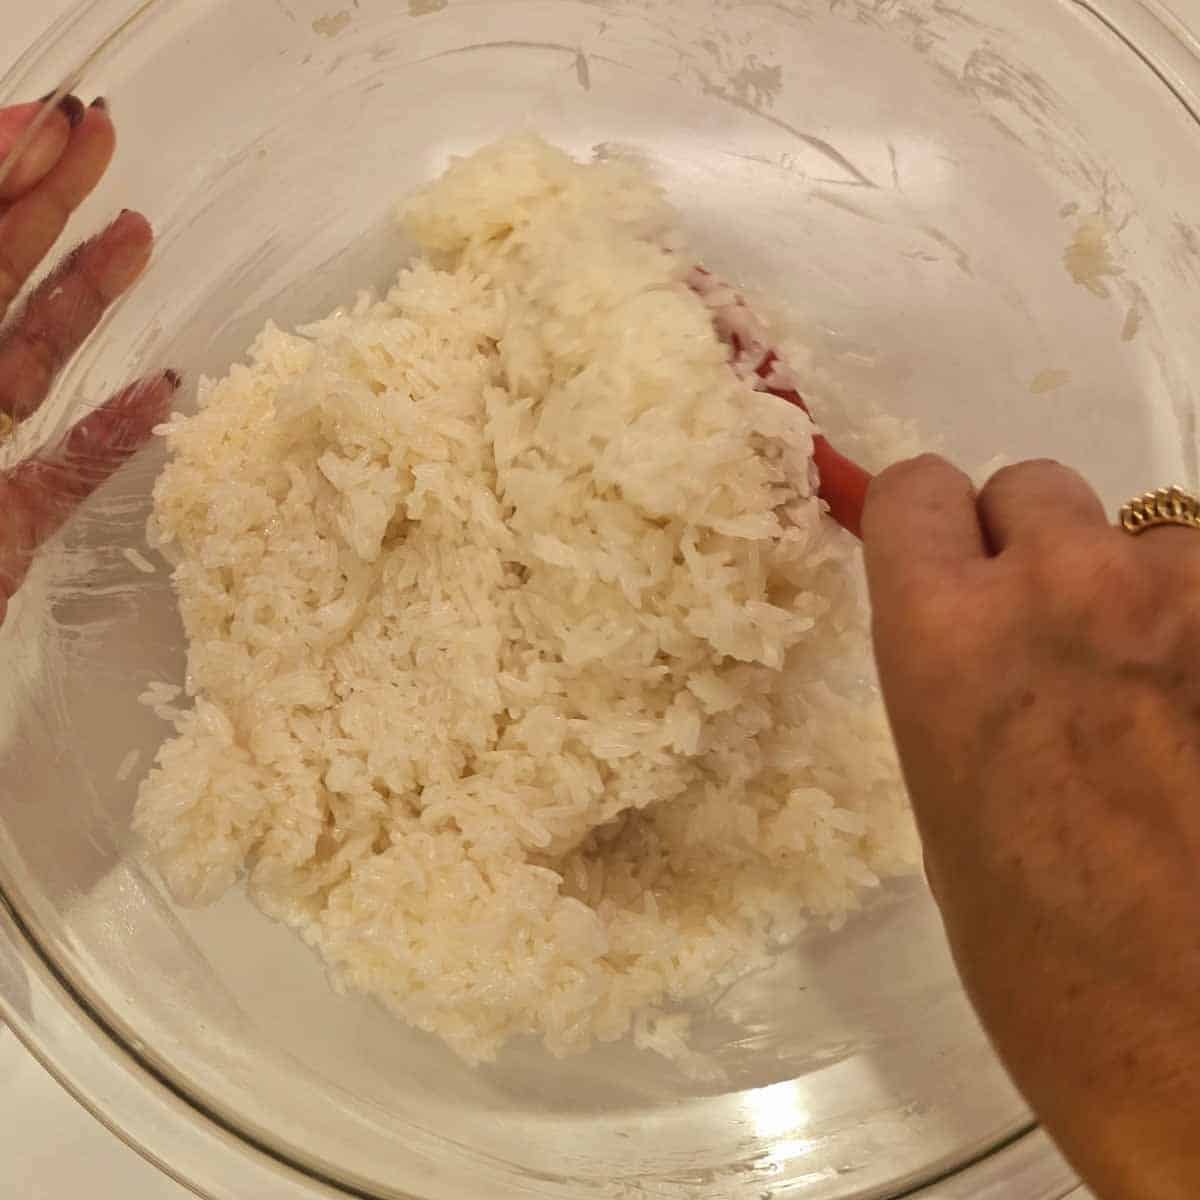 Mixing coconut sauce into sticky rice for Mango Sticky Rice preparation